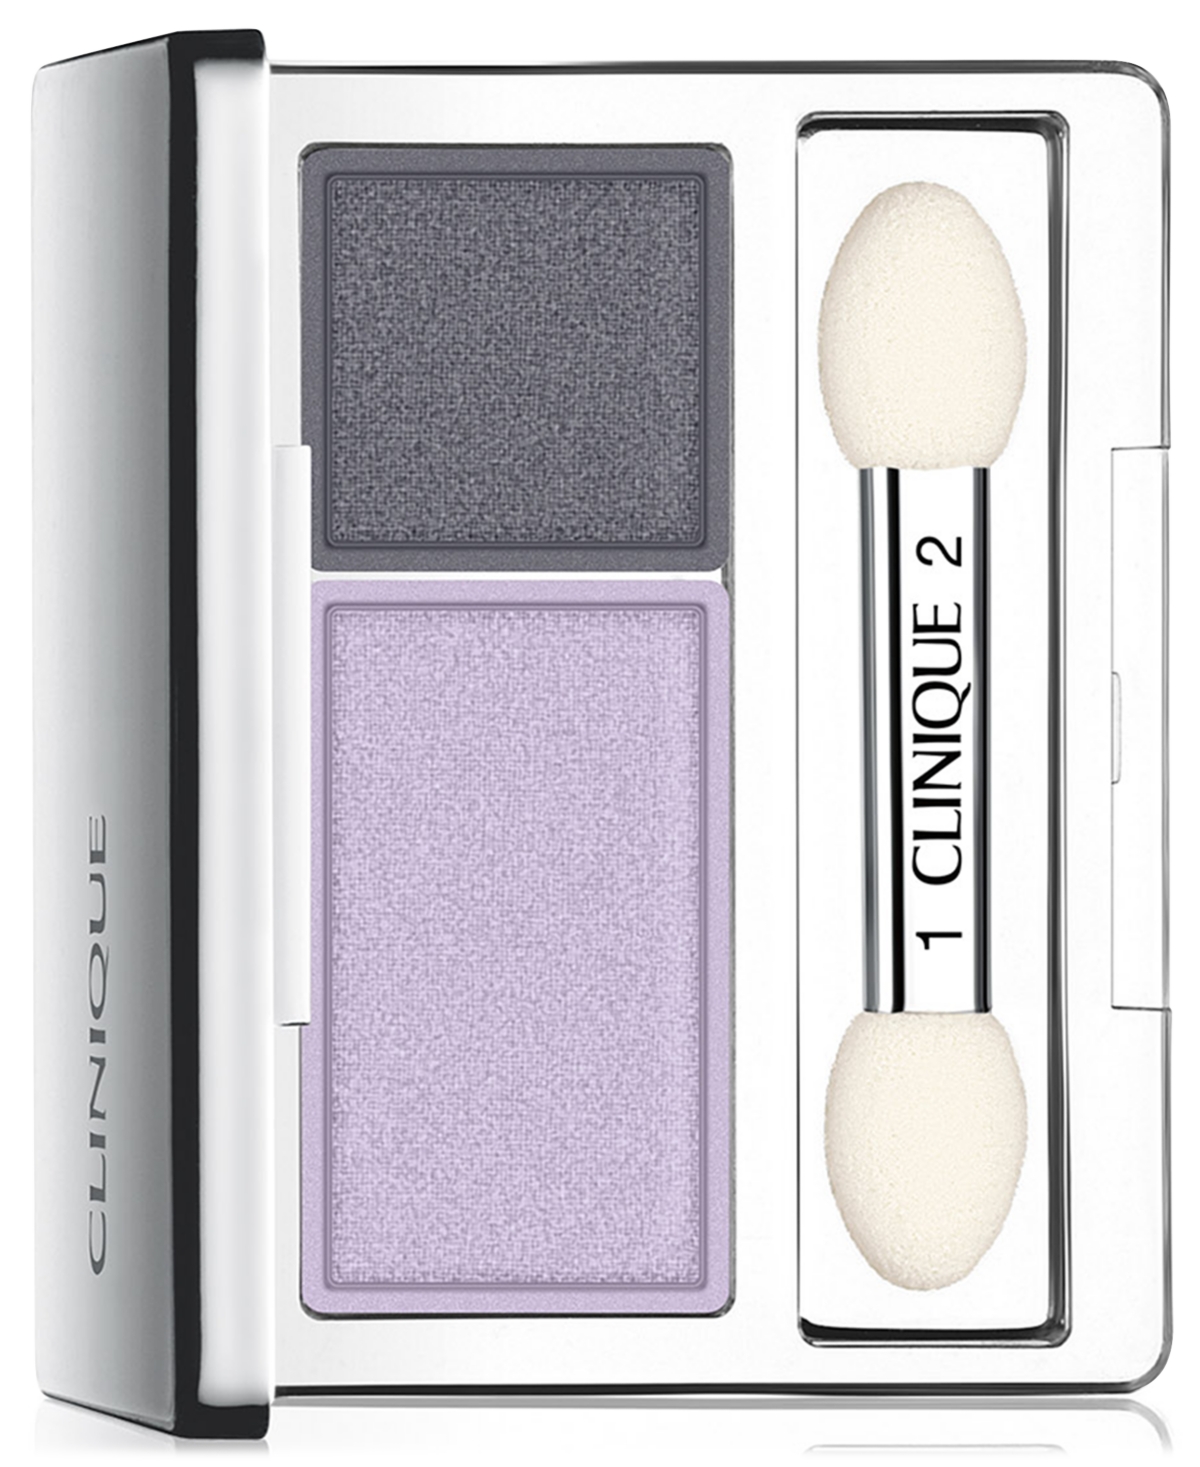 Clinique All About Shadow Duo Eyeshadow, 0.12 Oz. In Blackberry Frost